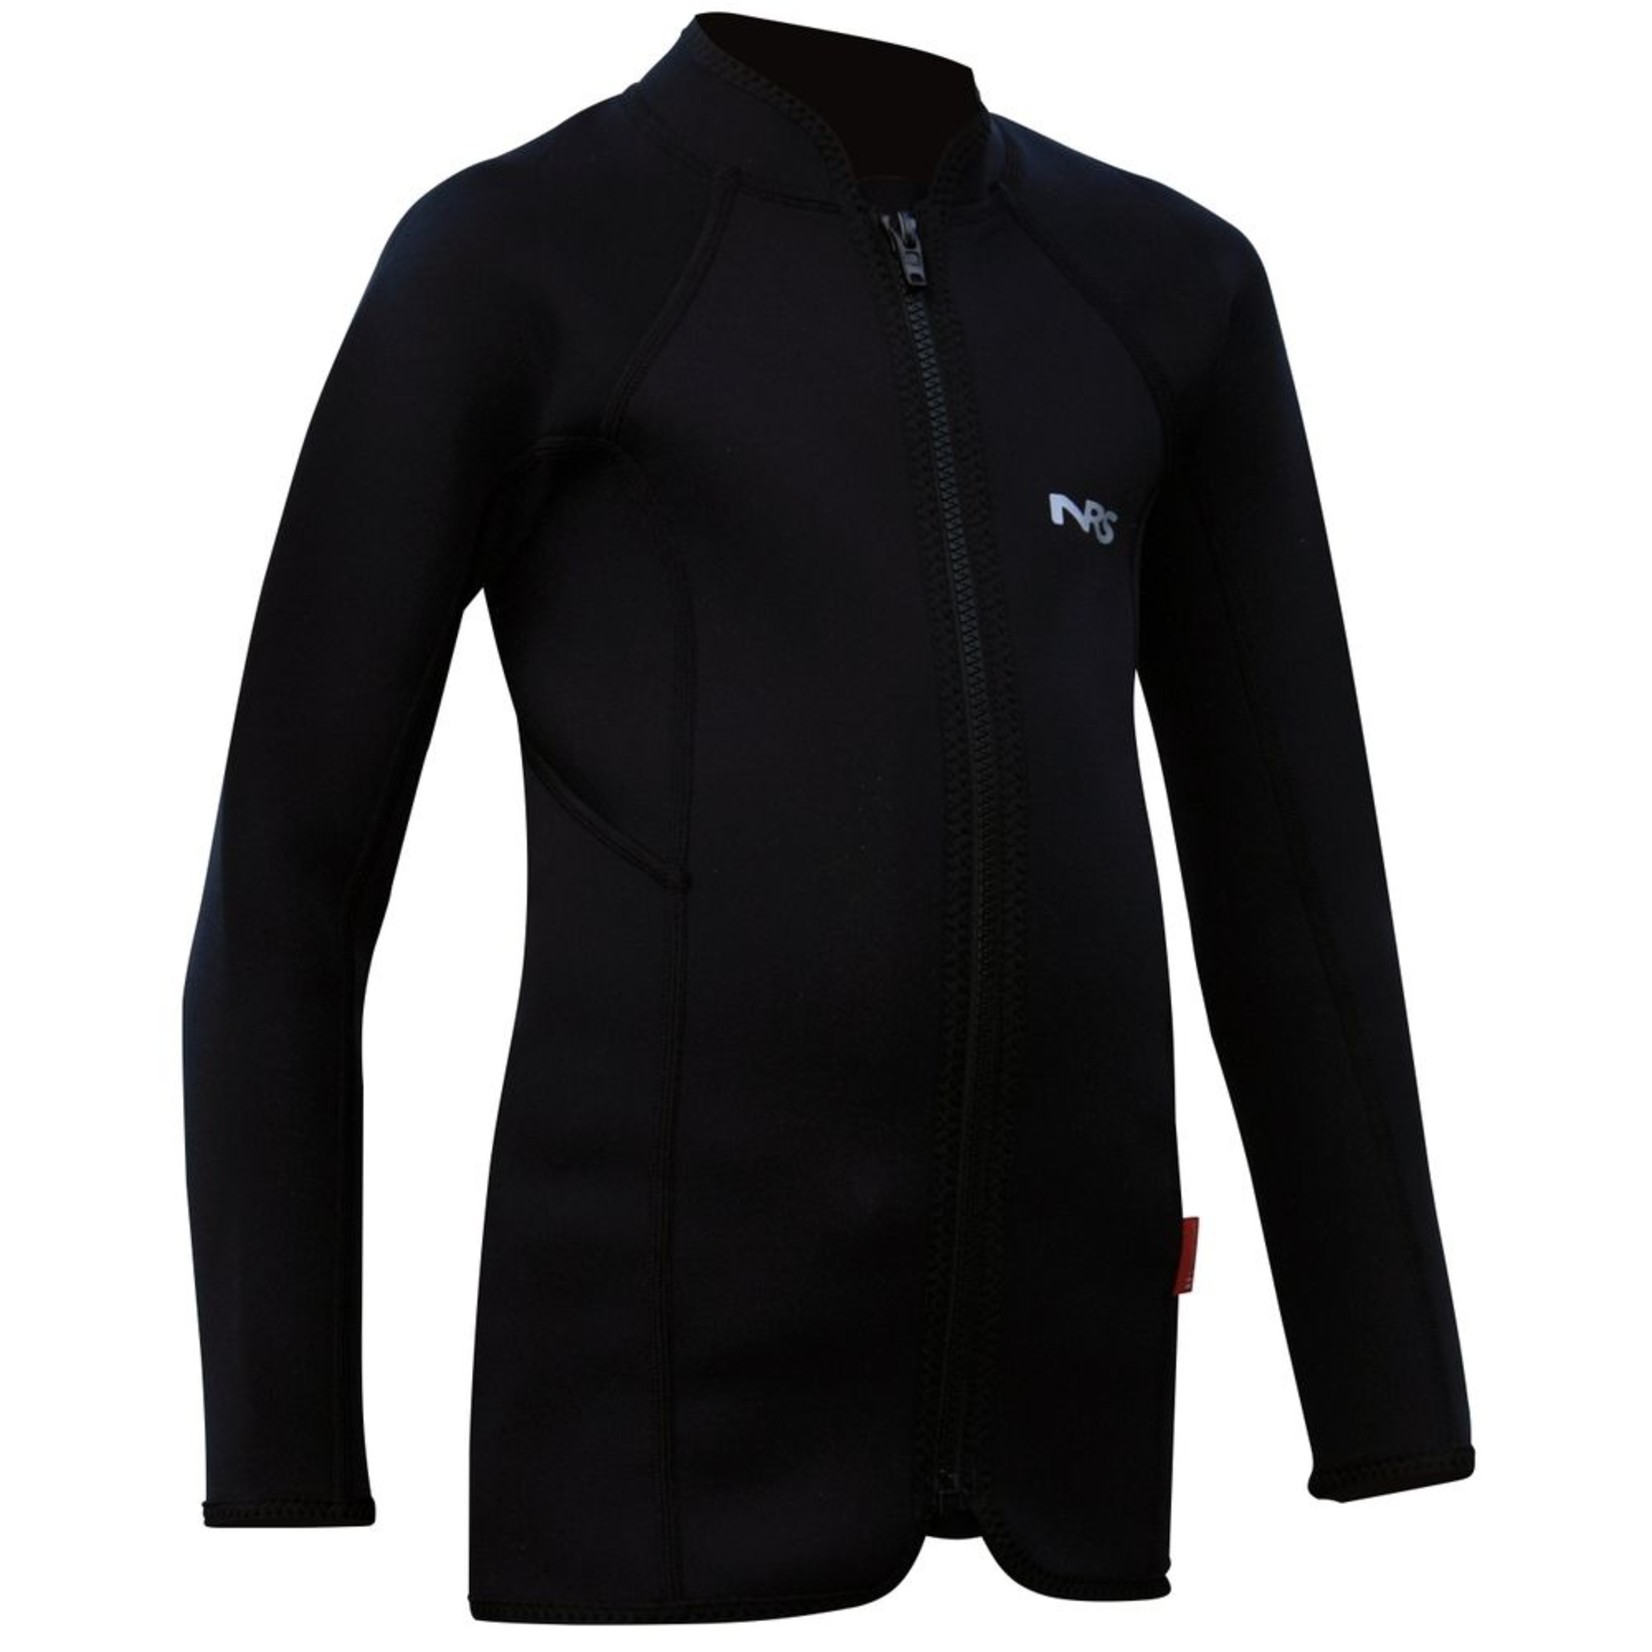 NRS NRS Youth Bill's Wetsuit Jacket